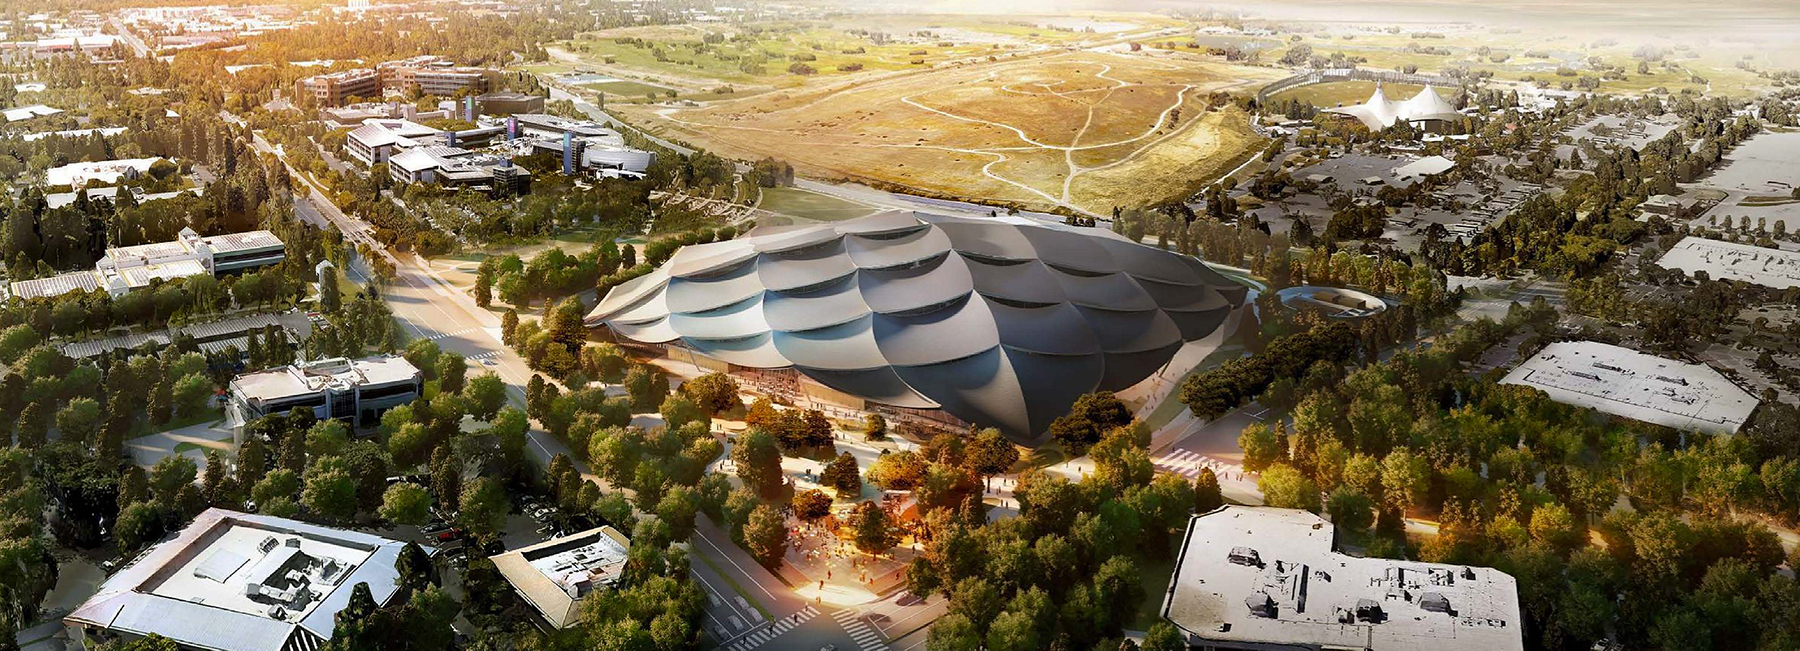 new images reveal the google mountain view campus in california